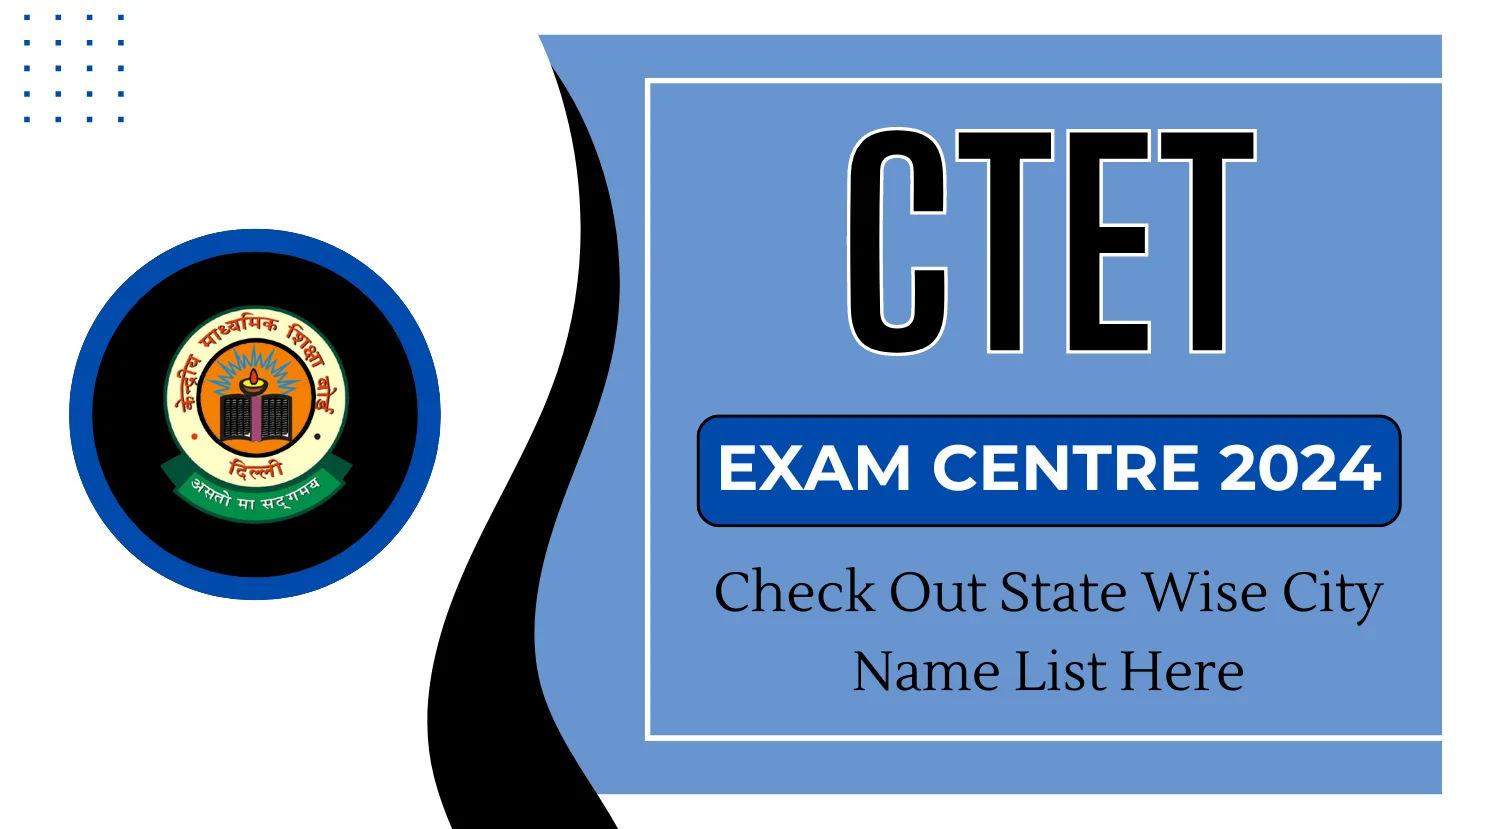 CTET Exam Centre 2024 Check Out State Wise City Name List Here